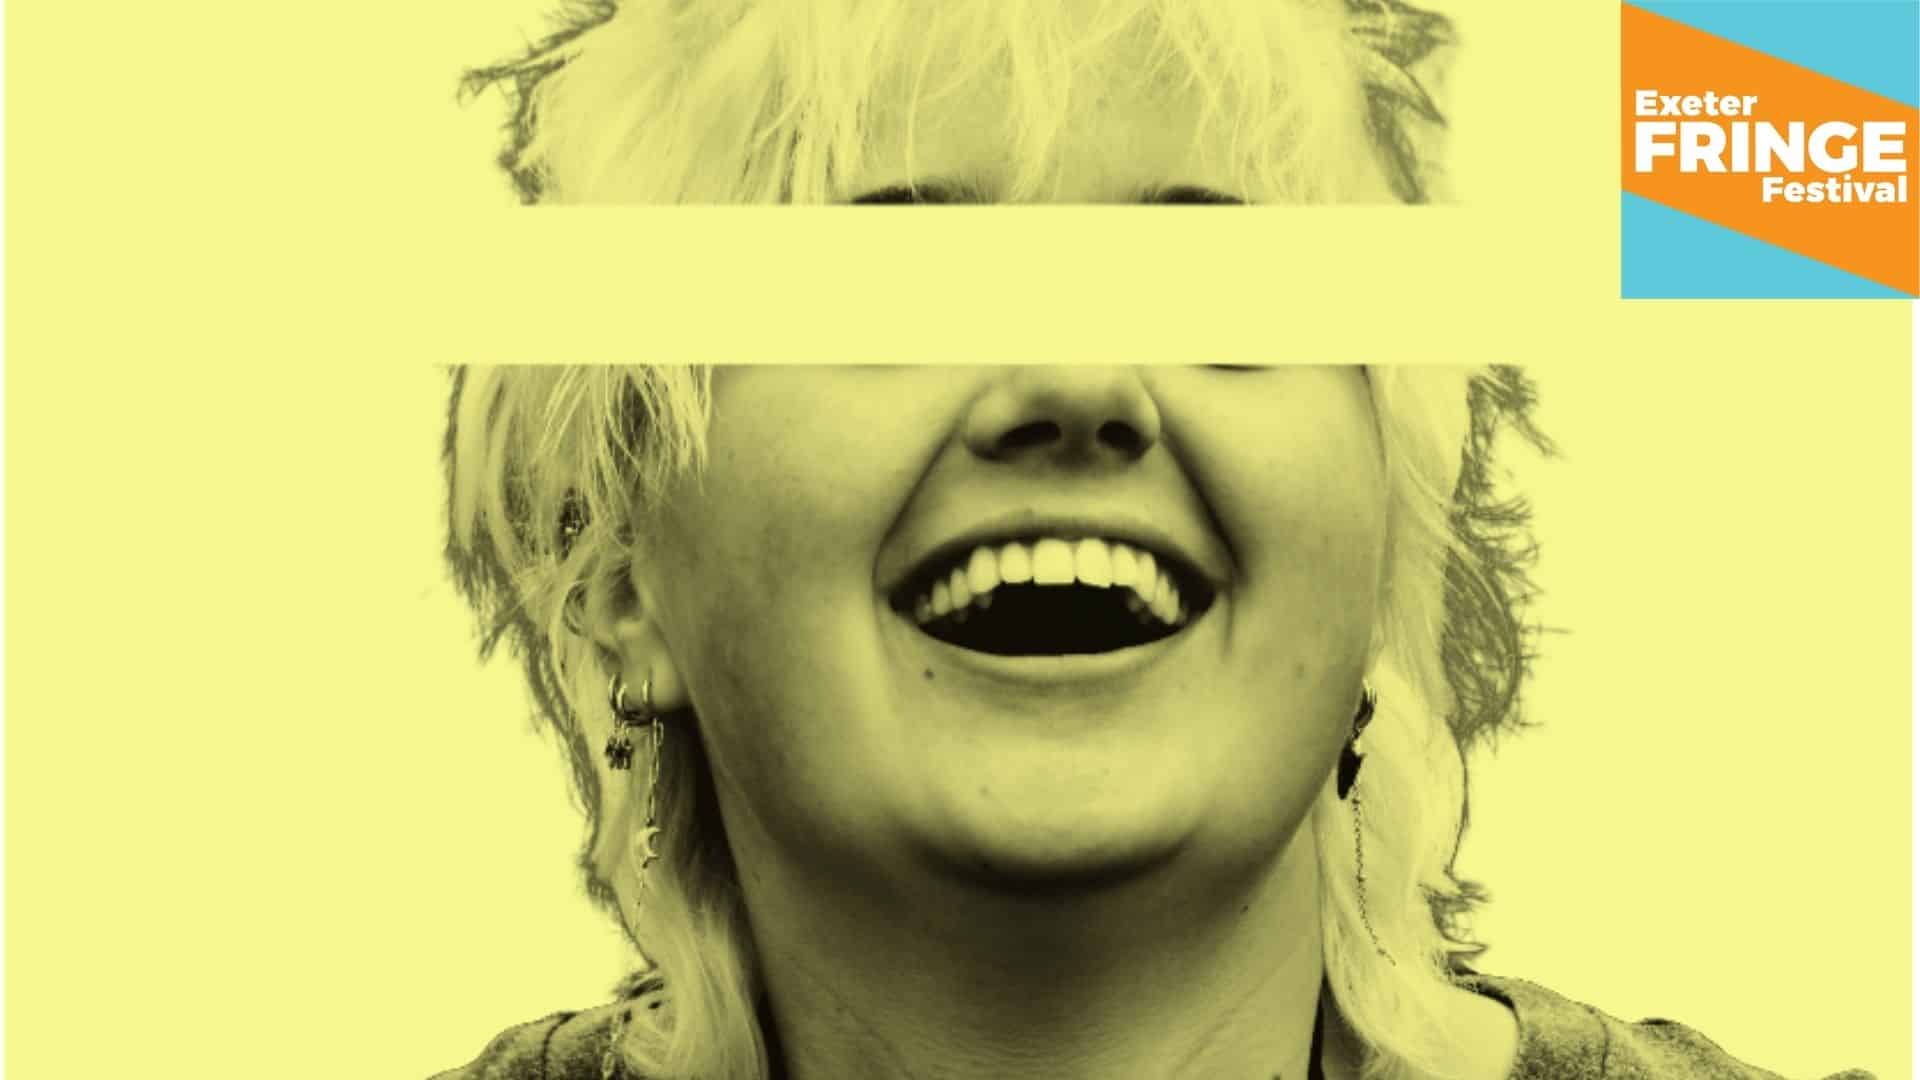 Promotional image for How Did I Get Here? - yellow monochromatic image featuring a young woman laughing, but a yellow bar is covering her eyes